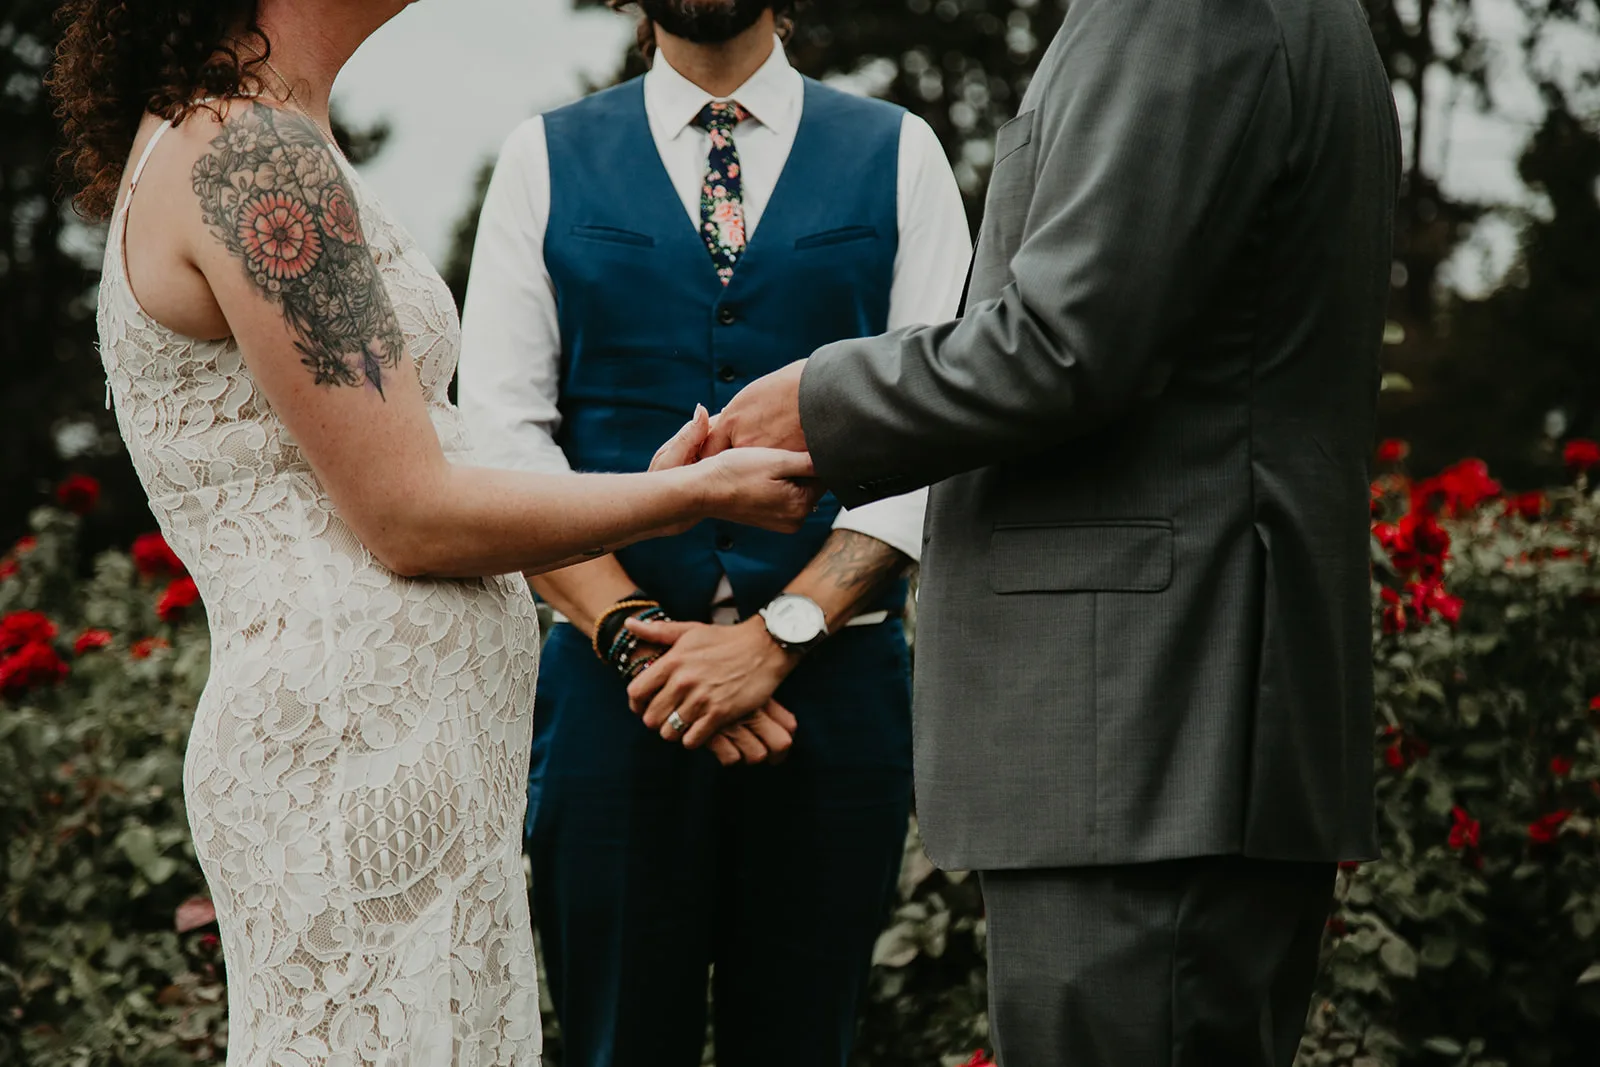 modern and cool wedding officiant outfits, blue tie and floral vest, jewelry and tattoos showing, young hip and married officiant